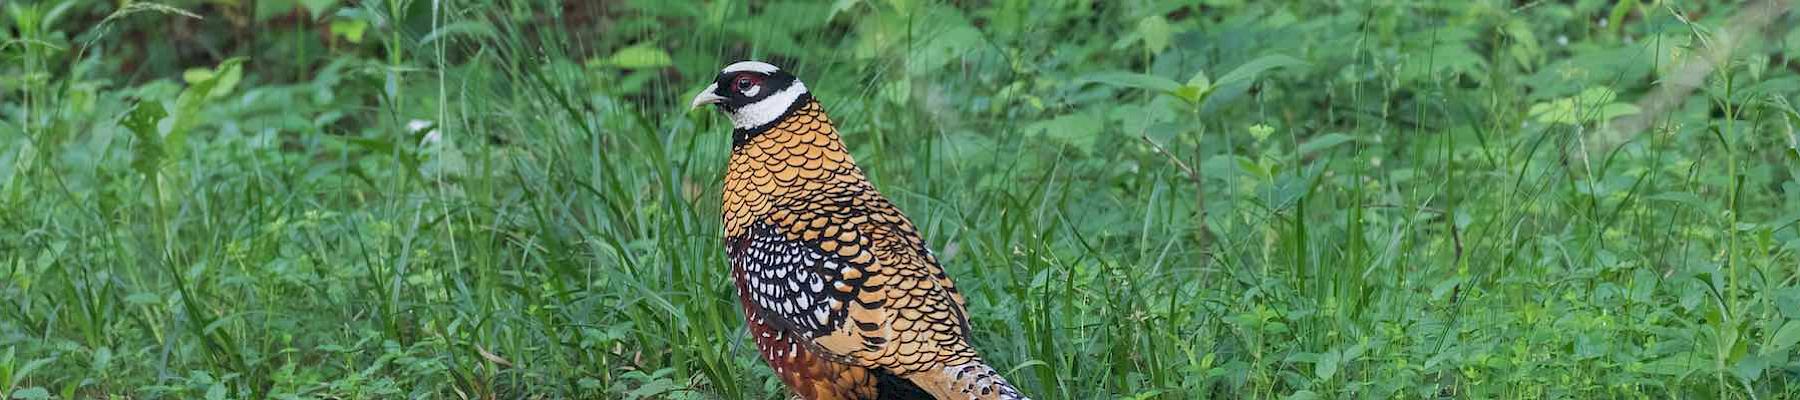 Reeve's Pheasant is proposed for an Appendix II listing © Pete Morris/Birdwquest